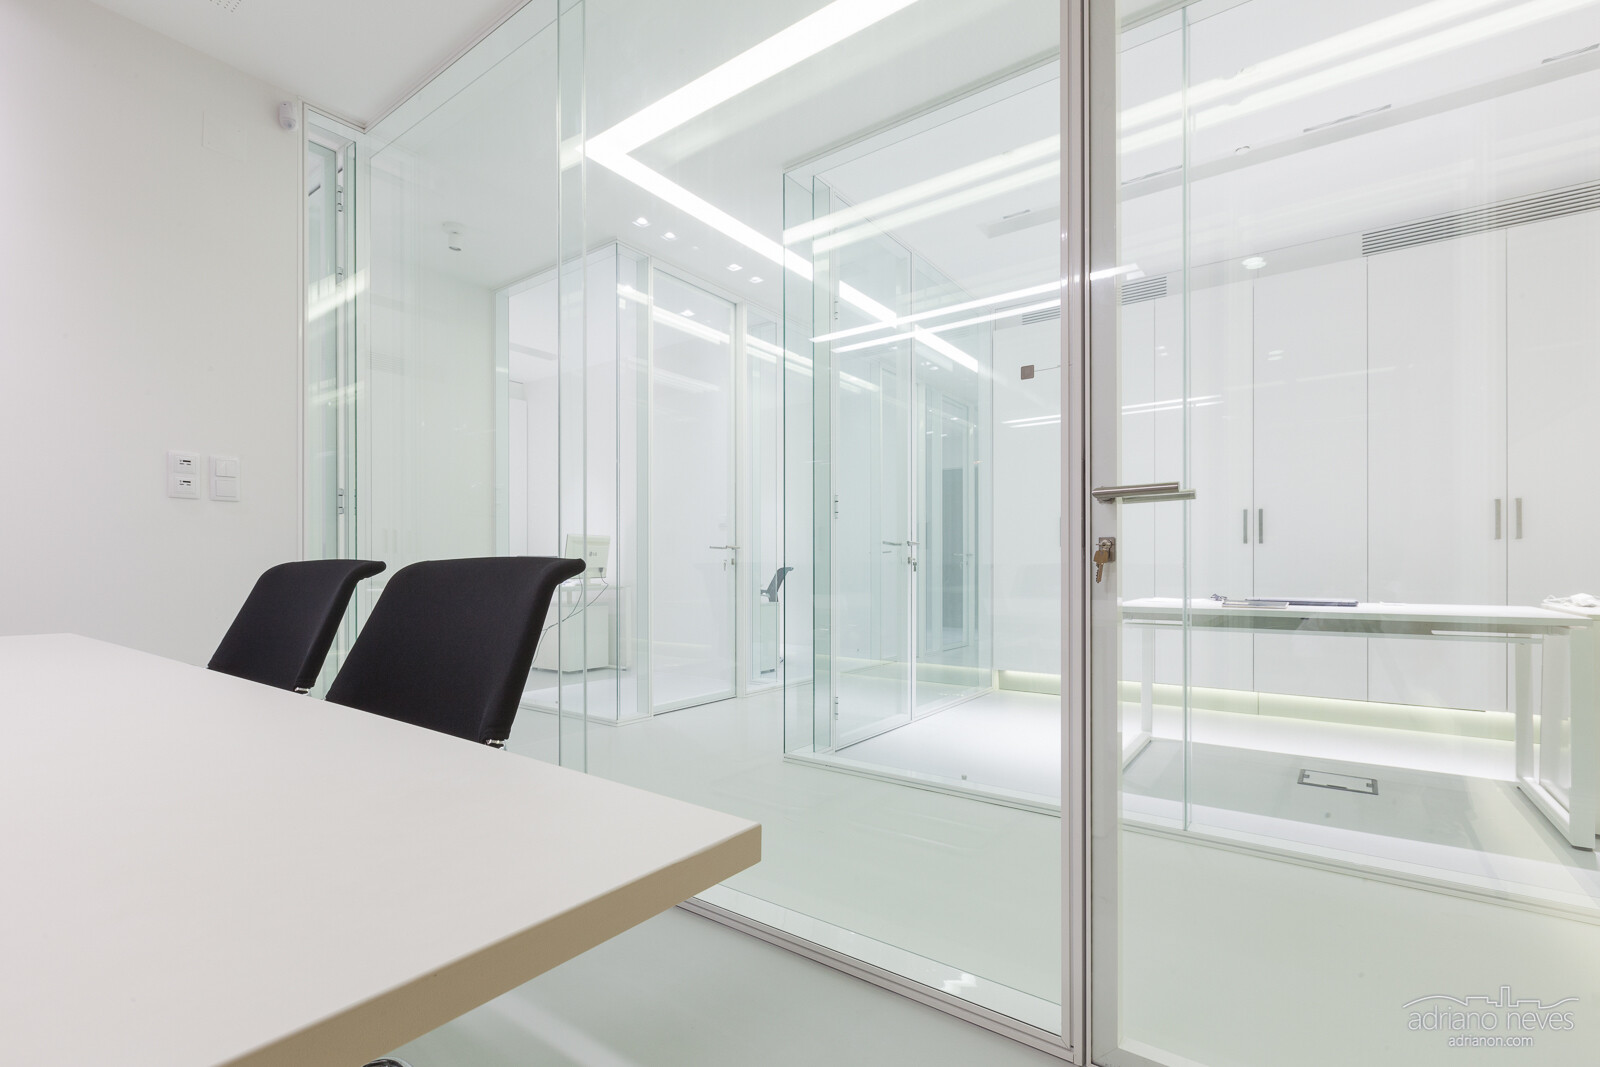 Indoor Office photo of Legal Partners Law Firm in Lisbon, Portugal - © Adriano Neves - adrianon.com - @acseven